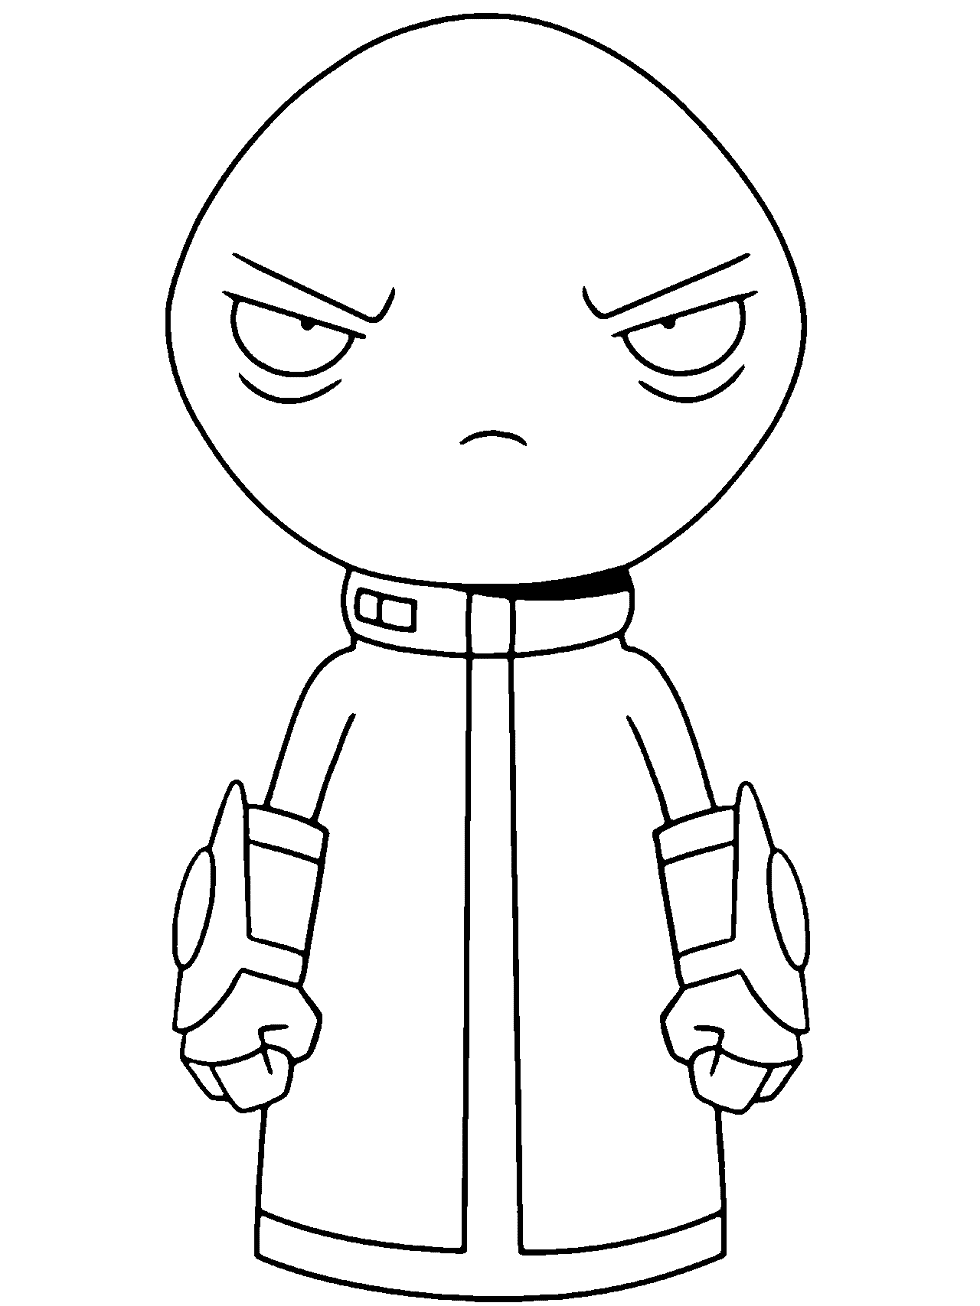 Lord Commander – Final Space Coloring Page